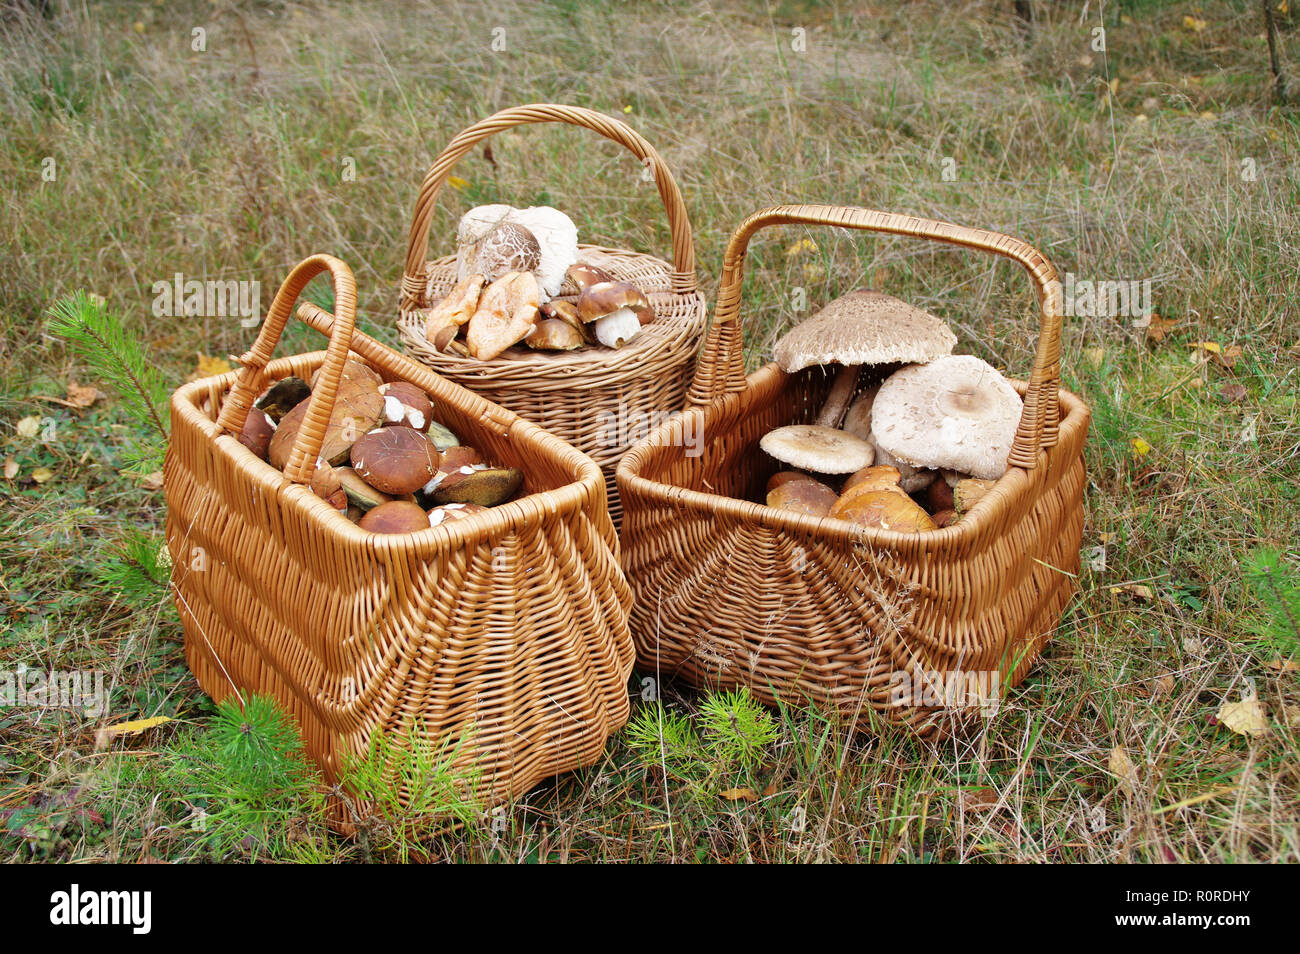 Wicker baskets full of raw edible mushrooms. Autumn mushrooming in forest. Stock Photo